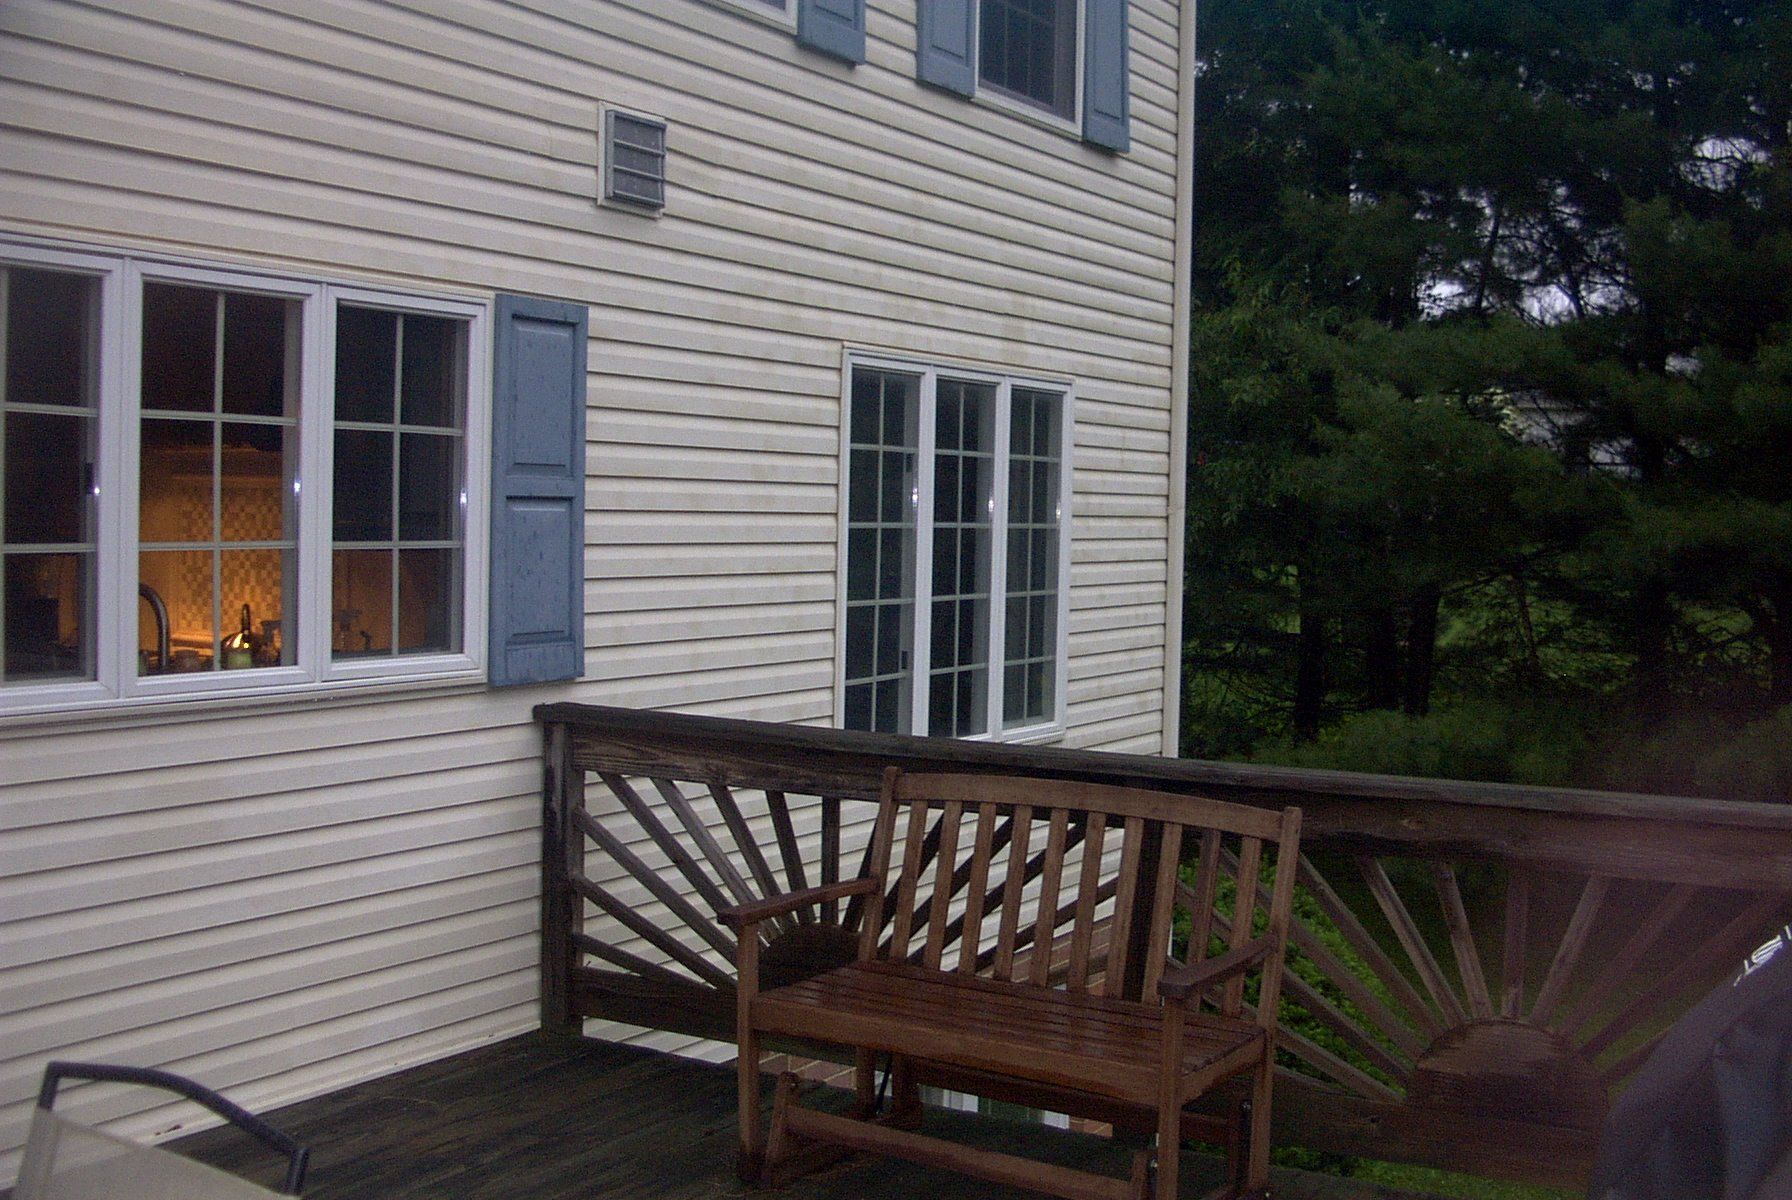 Siding - Home Improvement Services in Glen Arm, MD